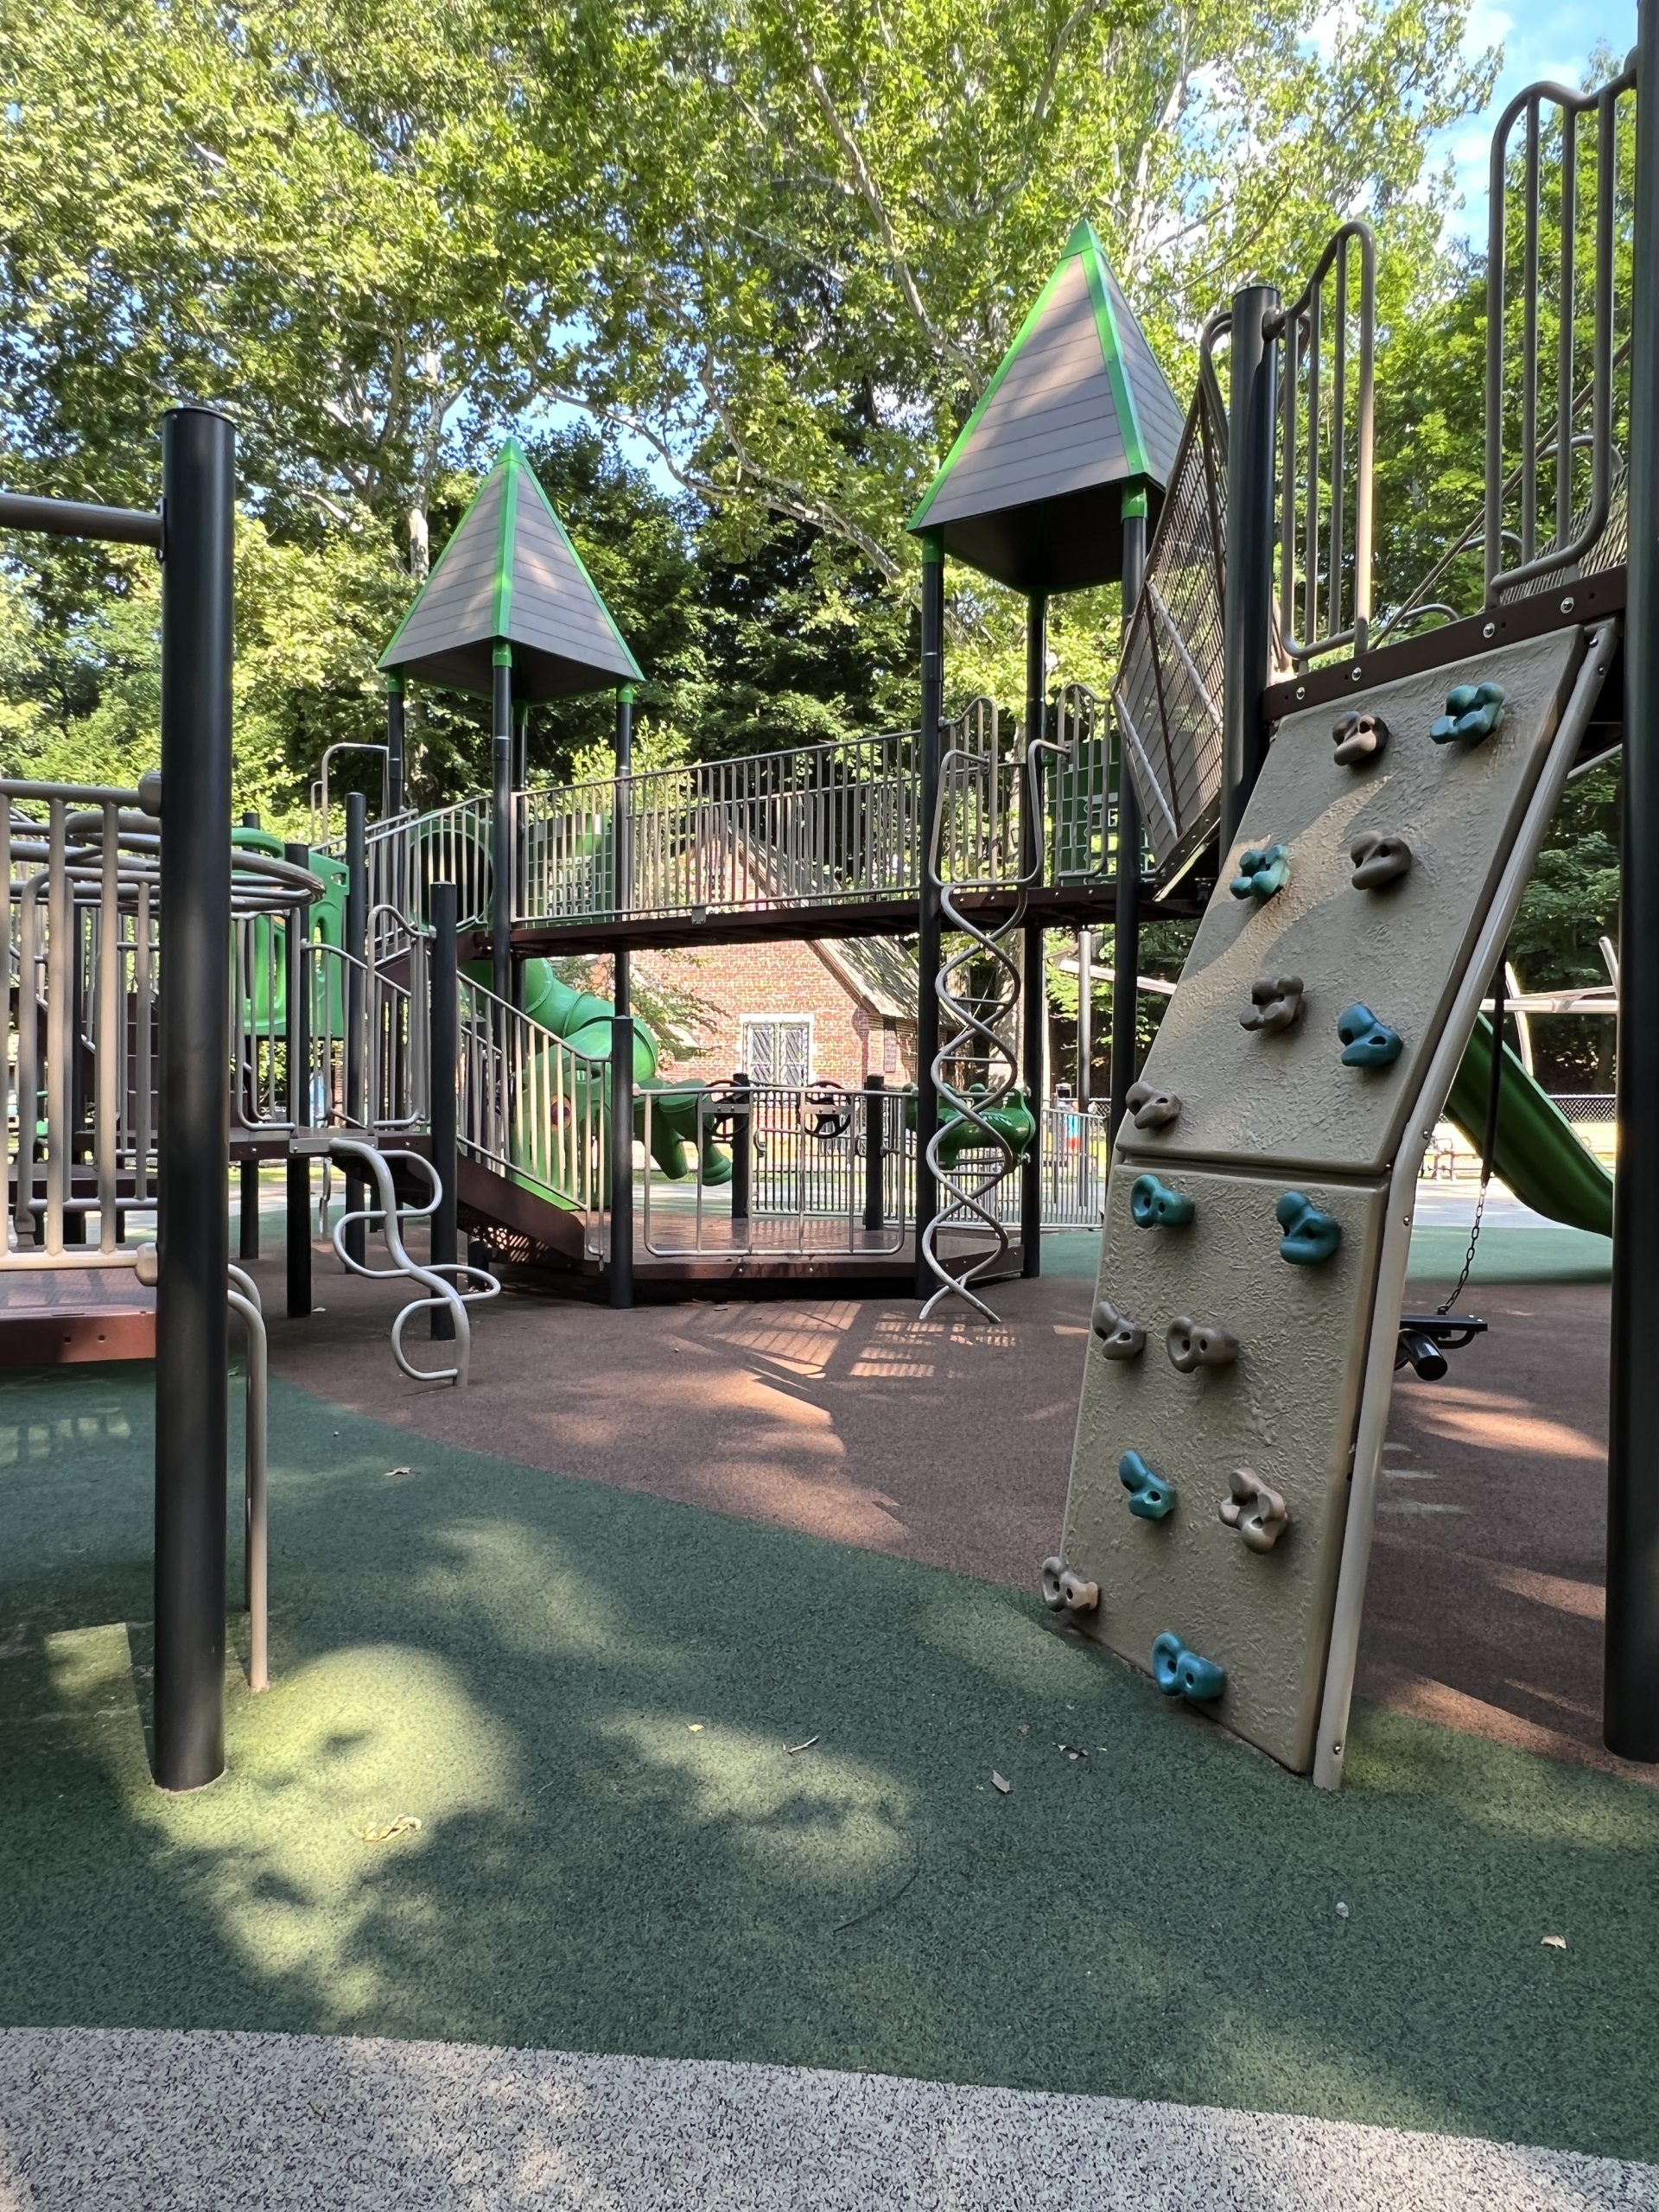 Grover Cleveland Playgrounds in Caldwell NJ - Large Playground Structure - Climbing wall